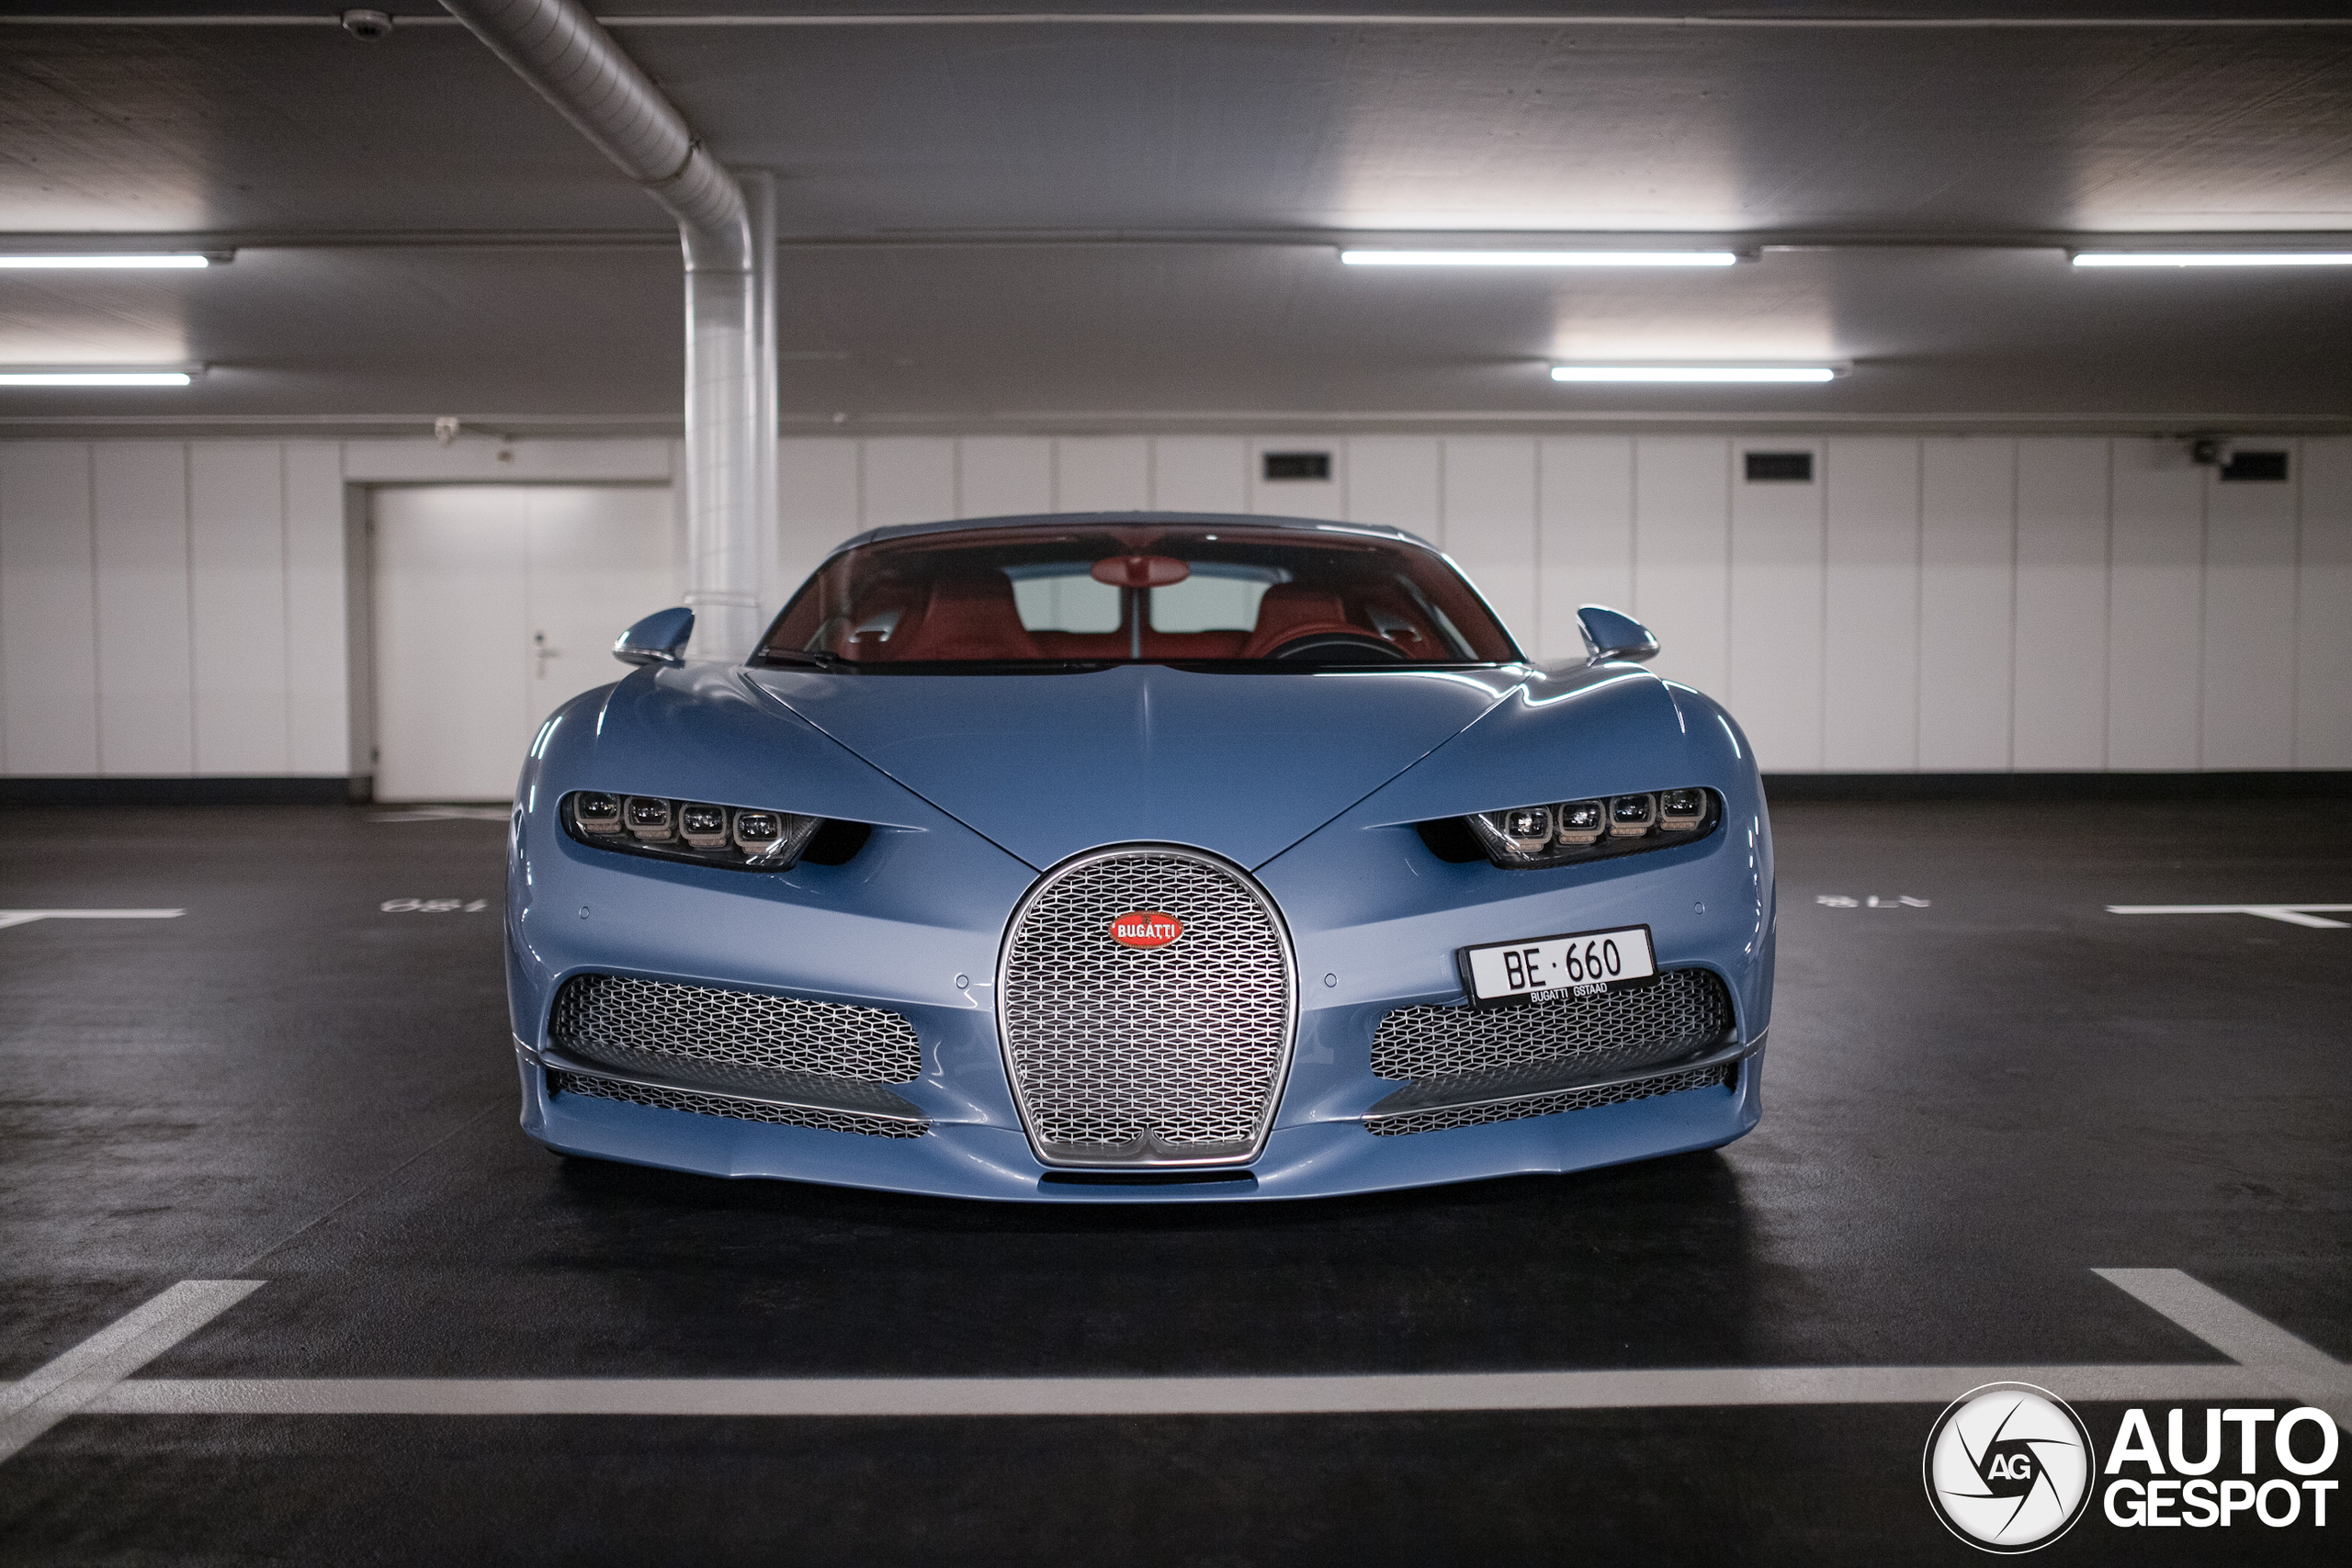 It's not the first time a hypercar has been parked in this garage